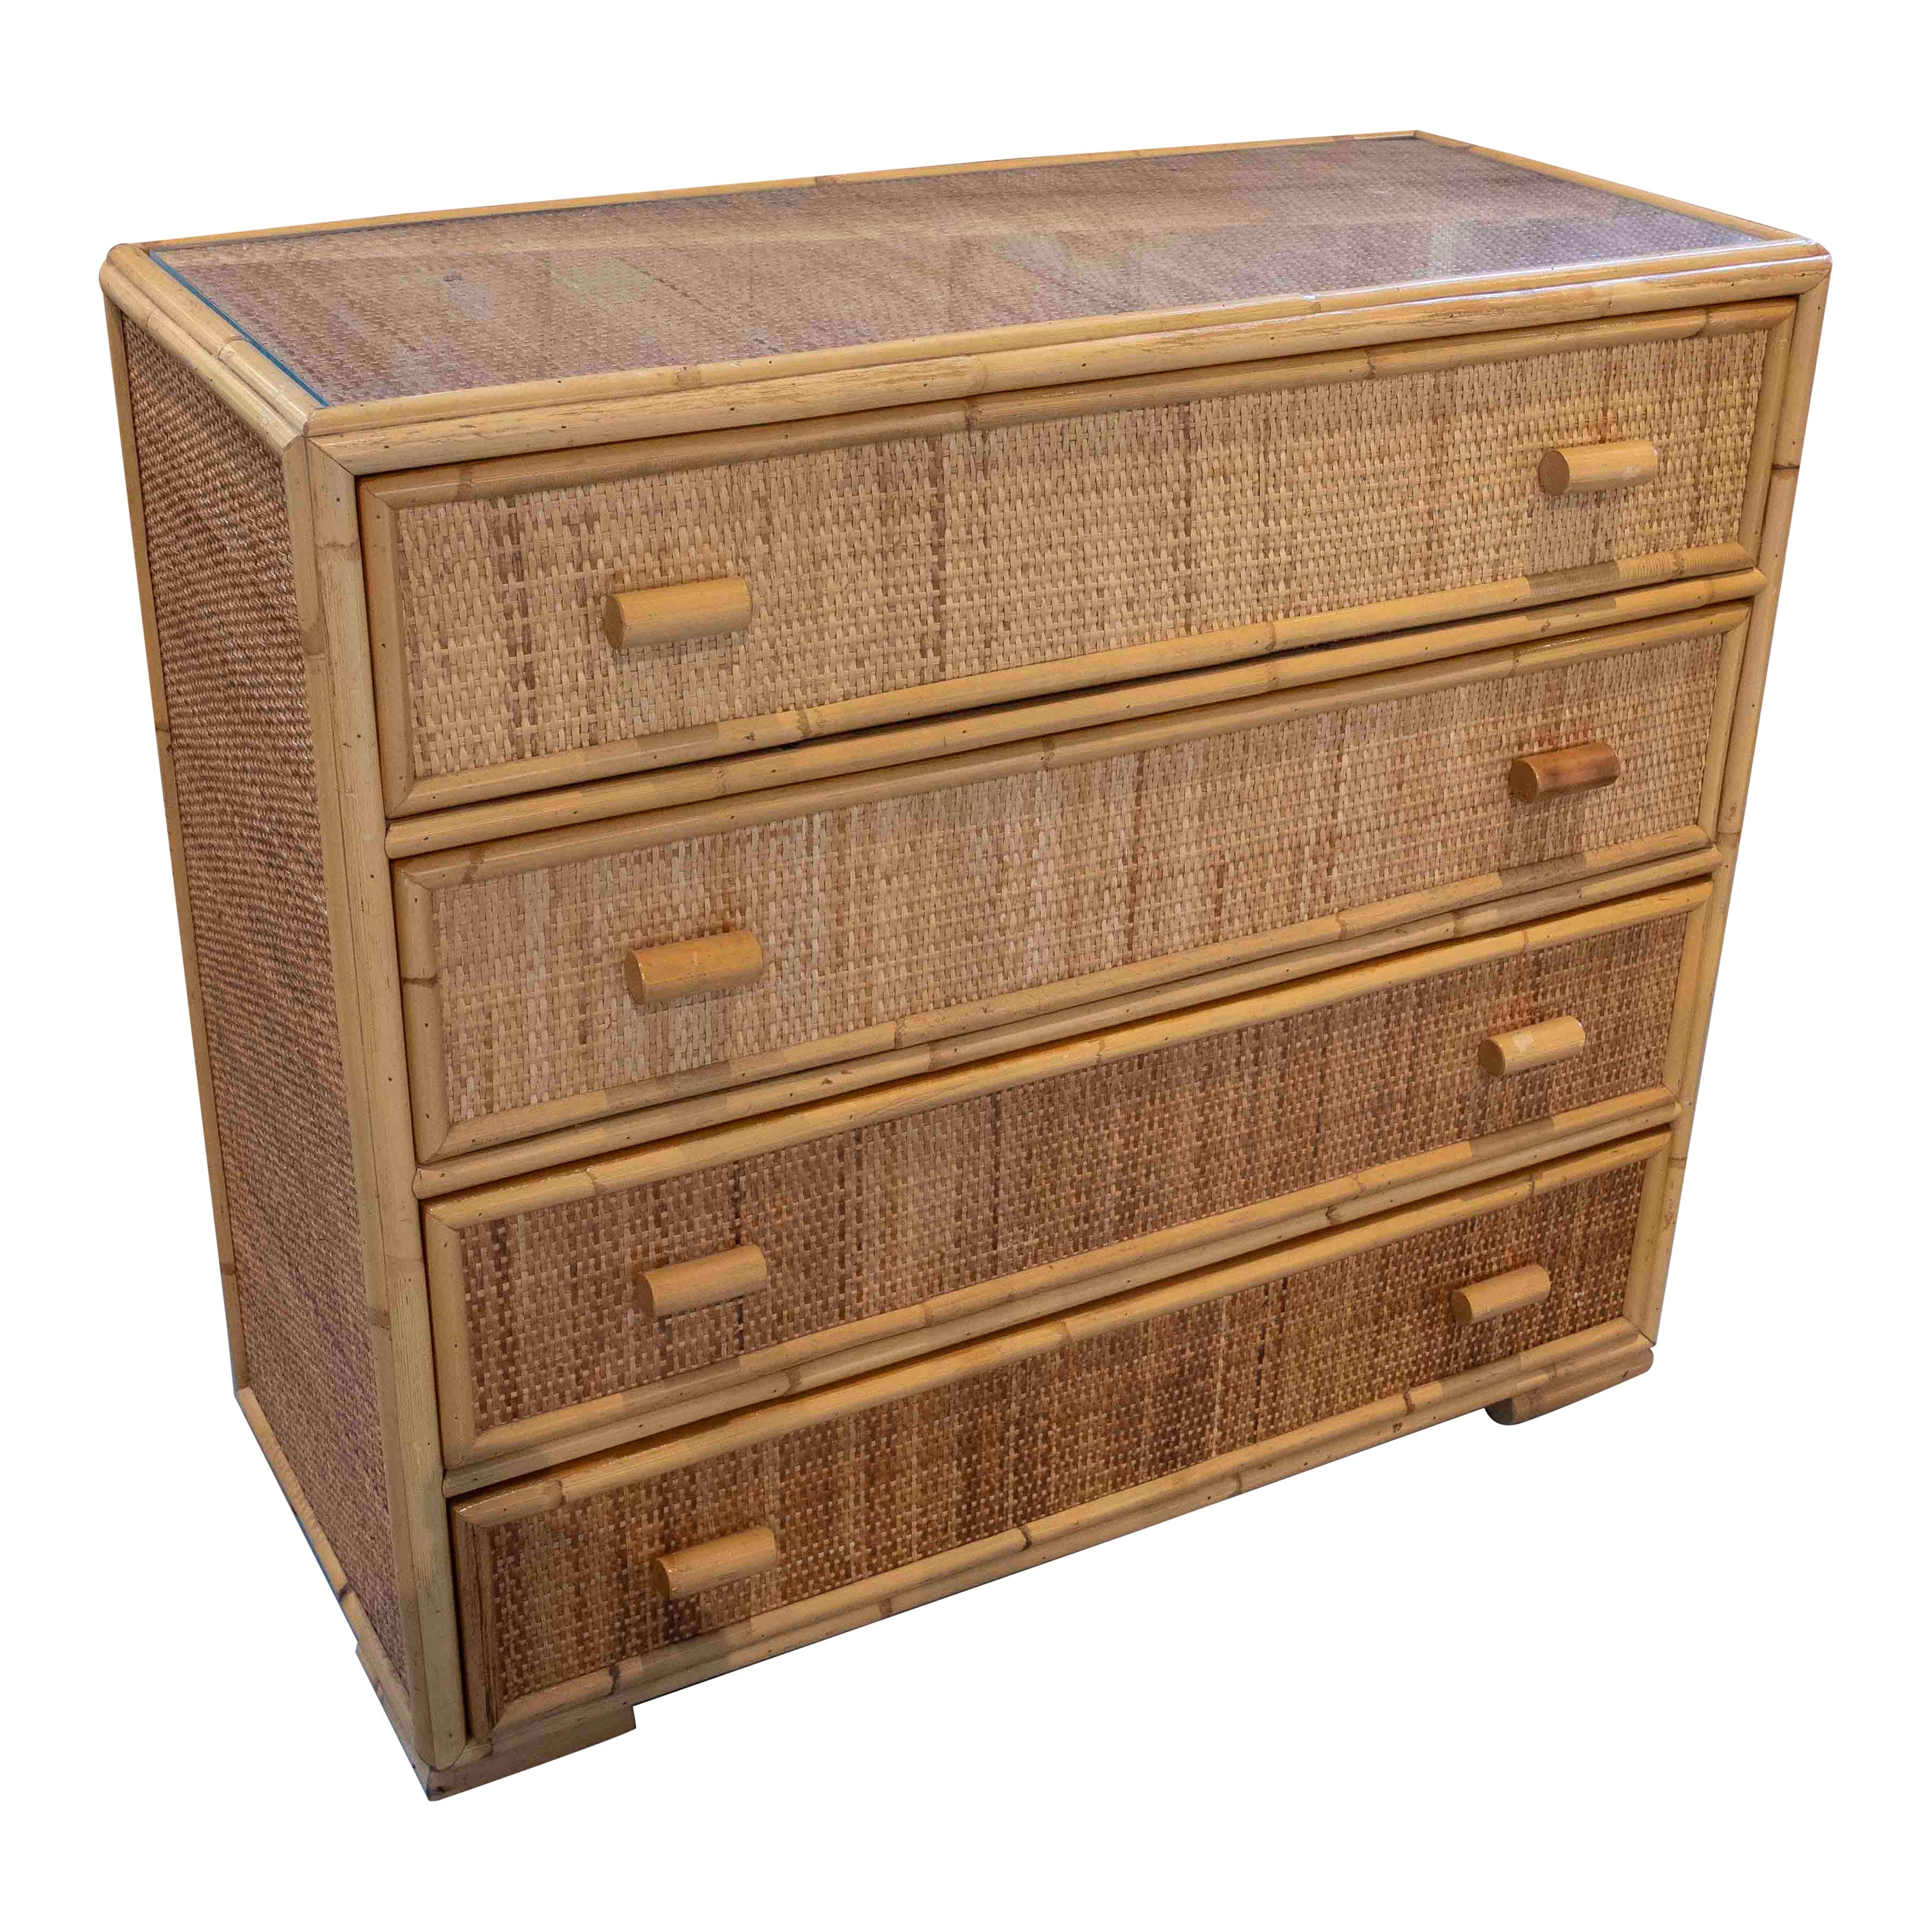 1970s Spanish Wicker Chest of Drawers with Three Drawers and Glass Top